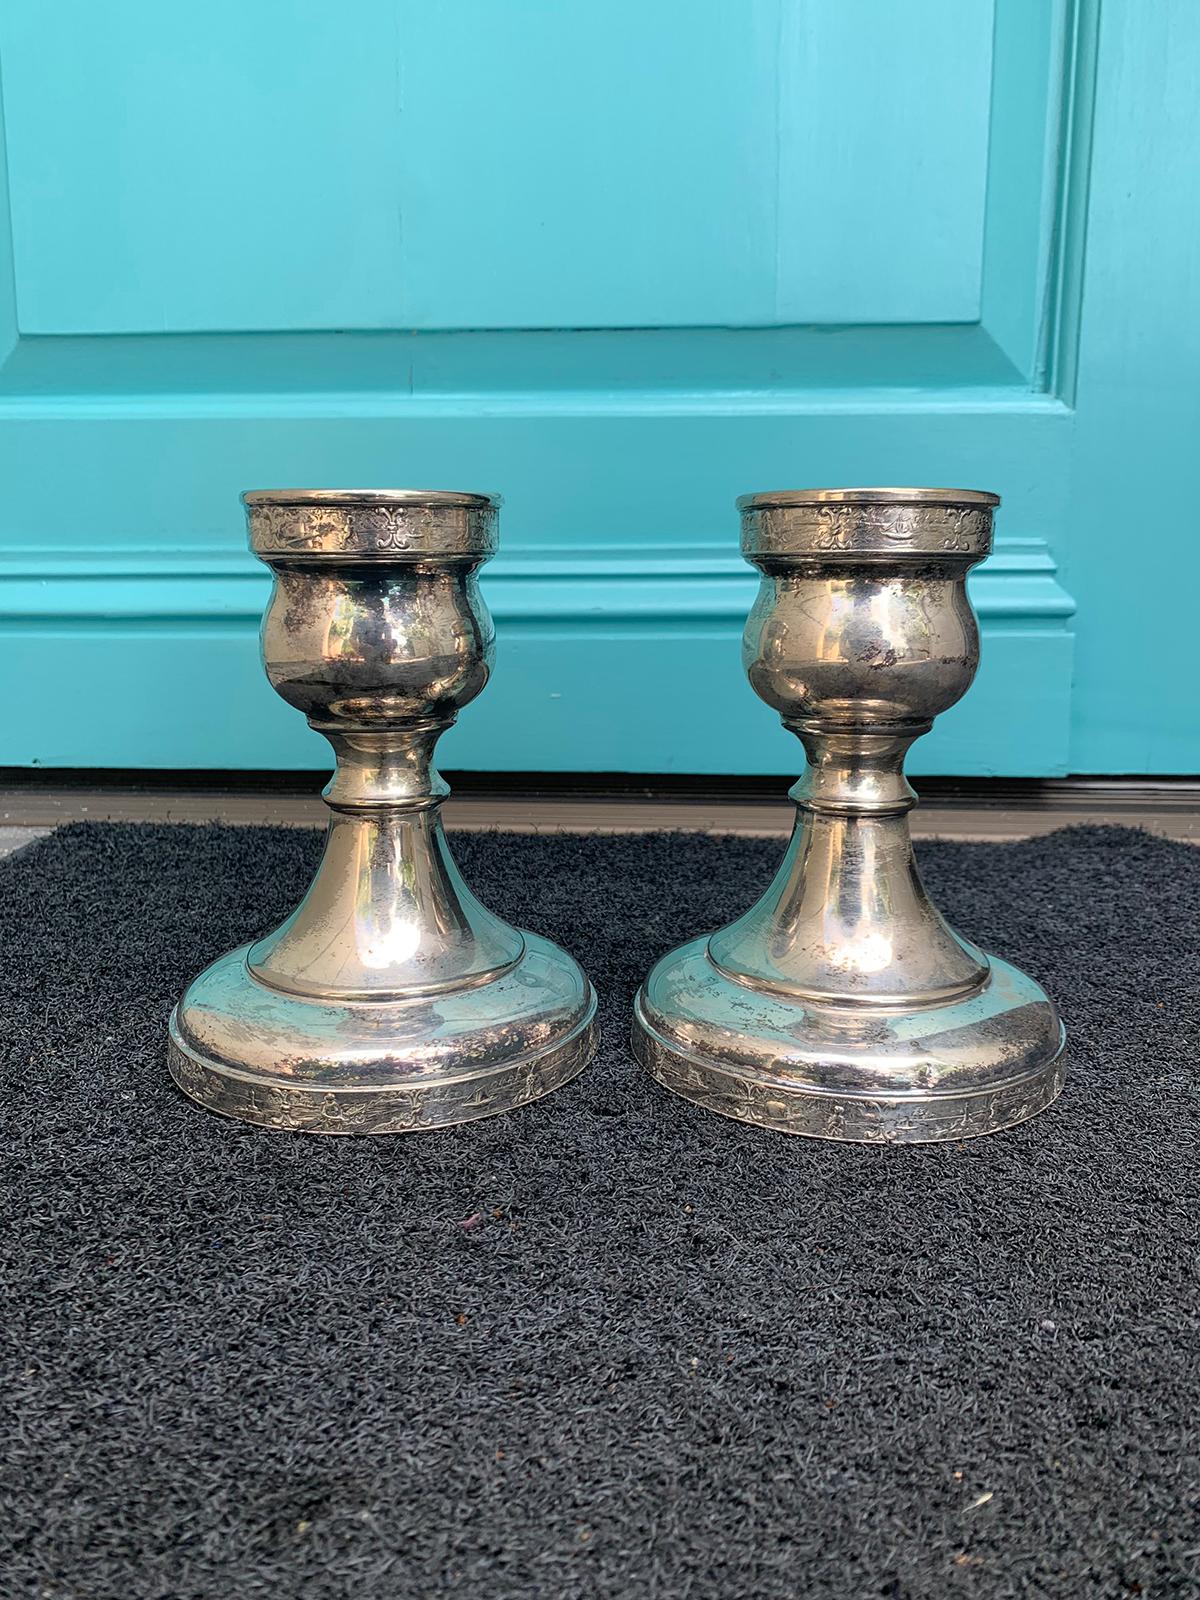 Pair of 20th century American quadruple silver plate candlesticks by Silvercraft, New York
Marked.